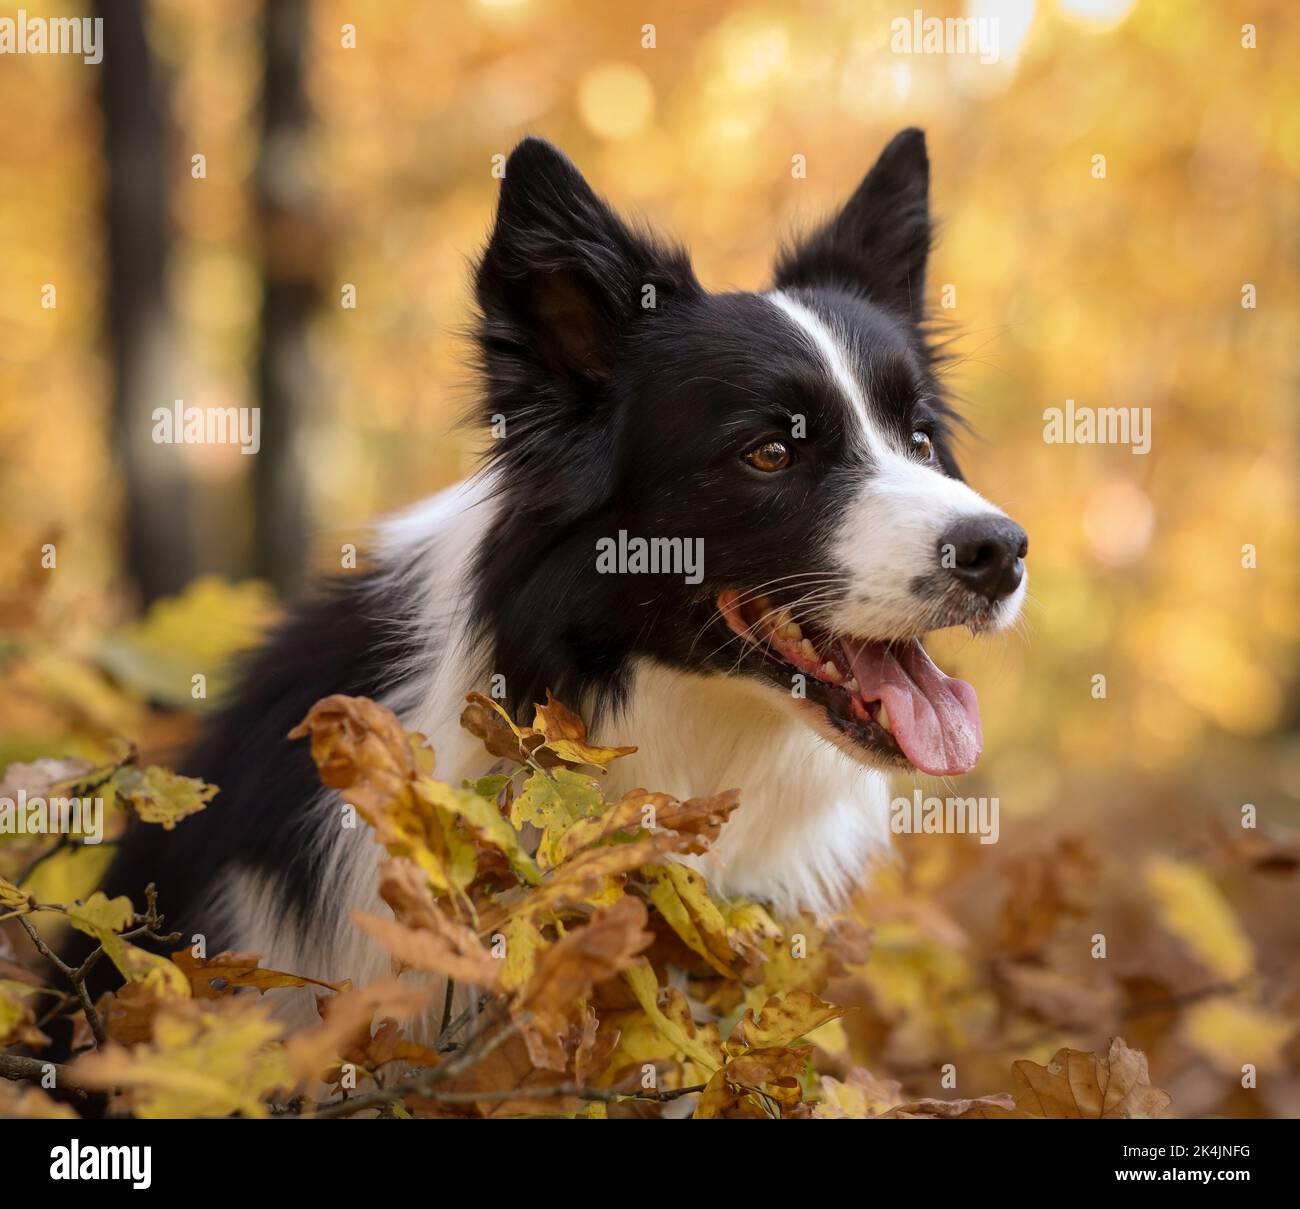 Head Portrait of Black and White Border Collie Dog in Yellow Autumnal Nature. Cute Sheepdog in Autumn Colorful Forest. Stock Photo